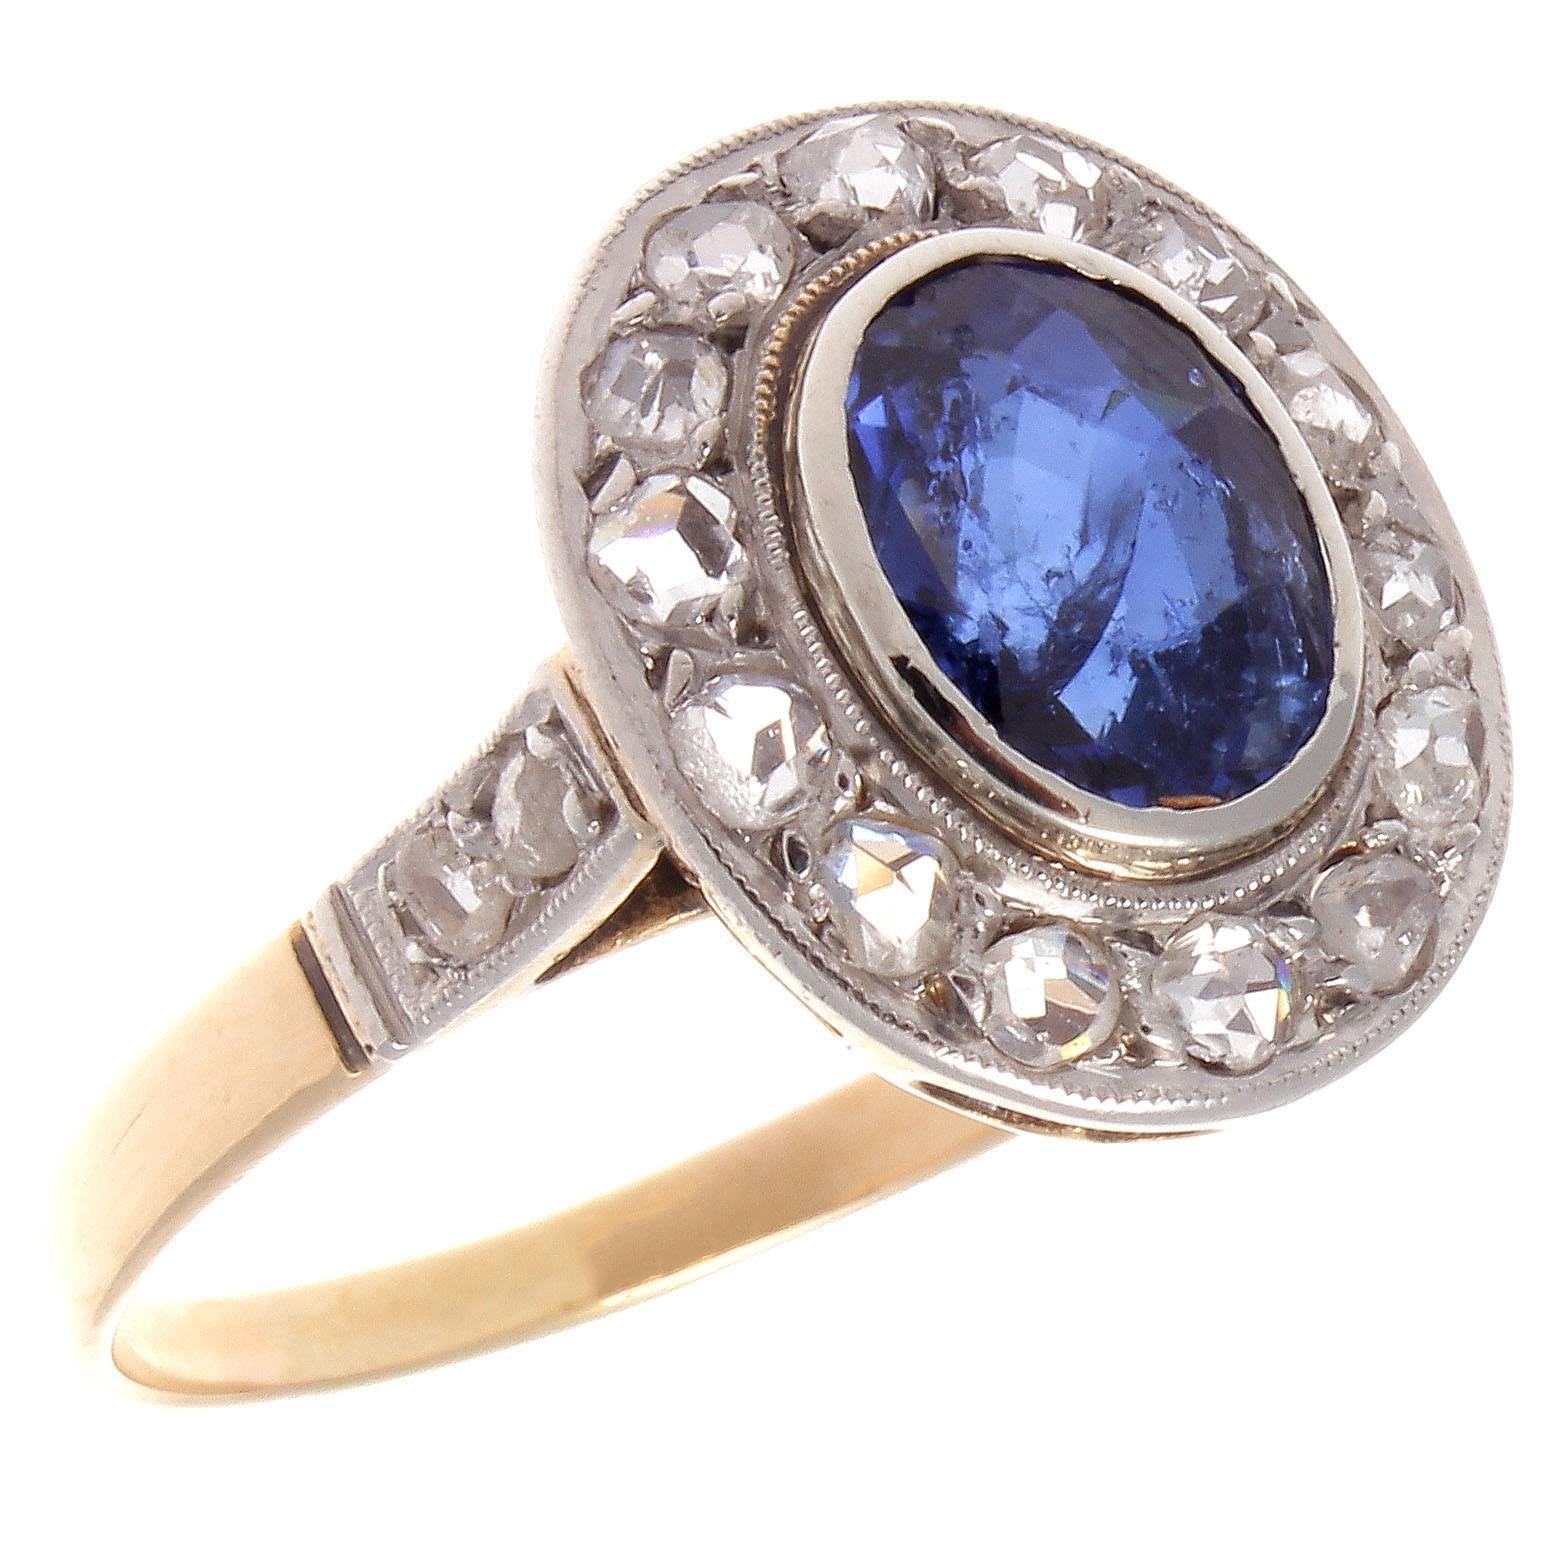 Oval Cut French Belle Époque Sapphire Diamond Gold Ring